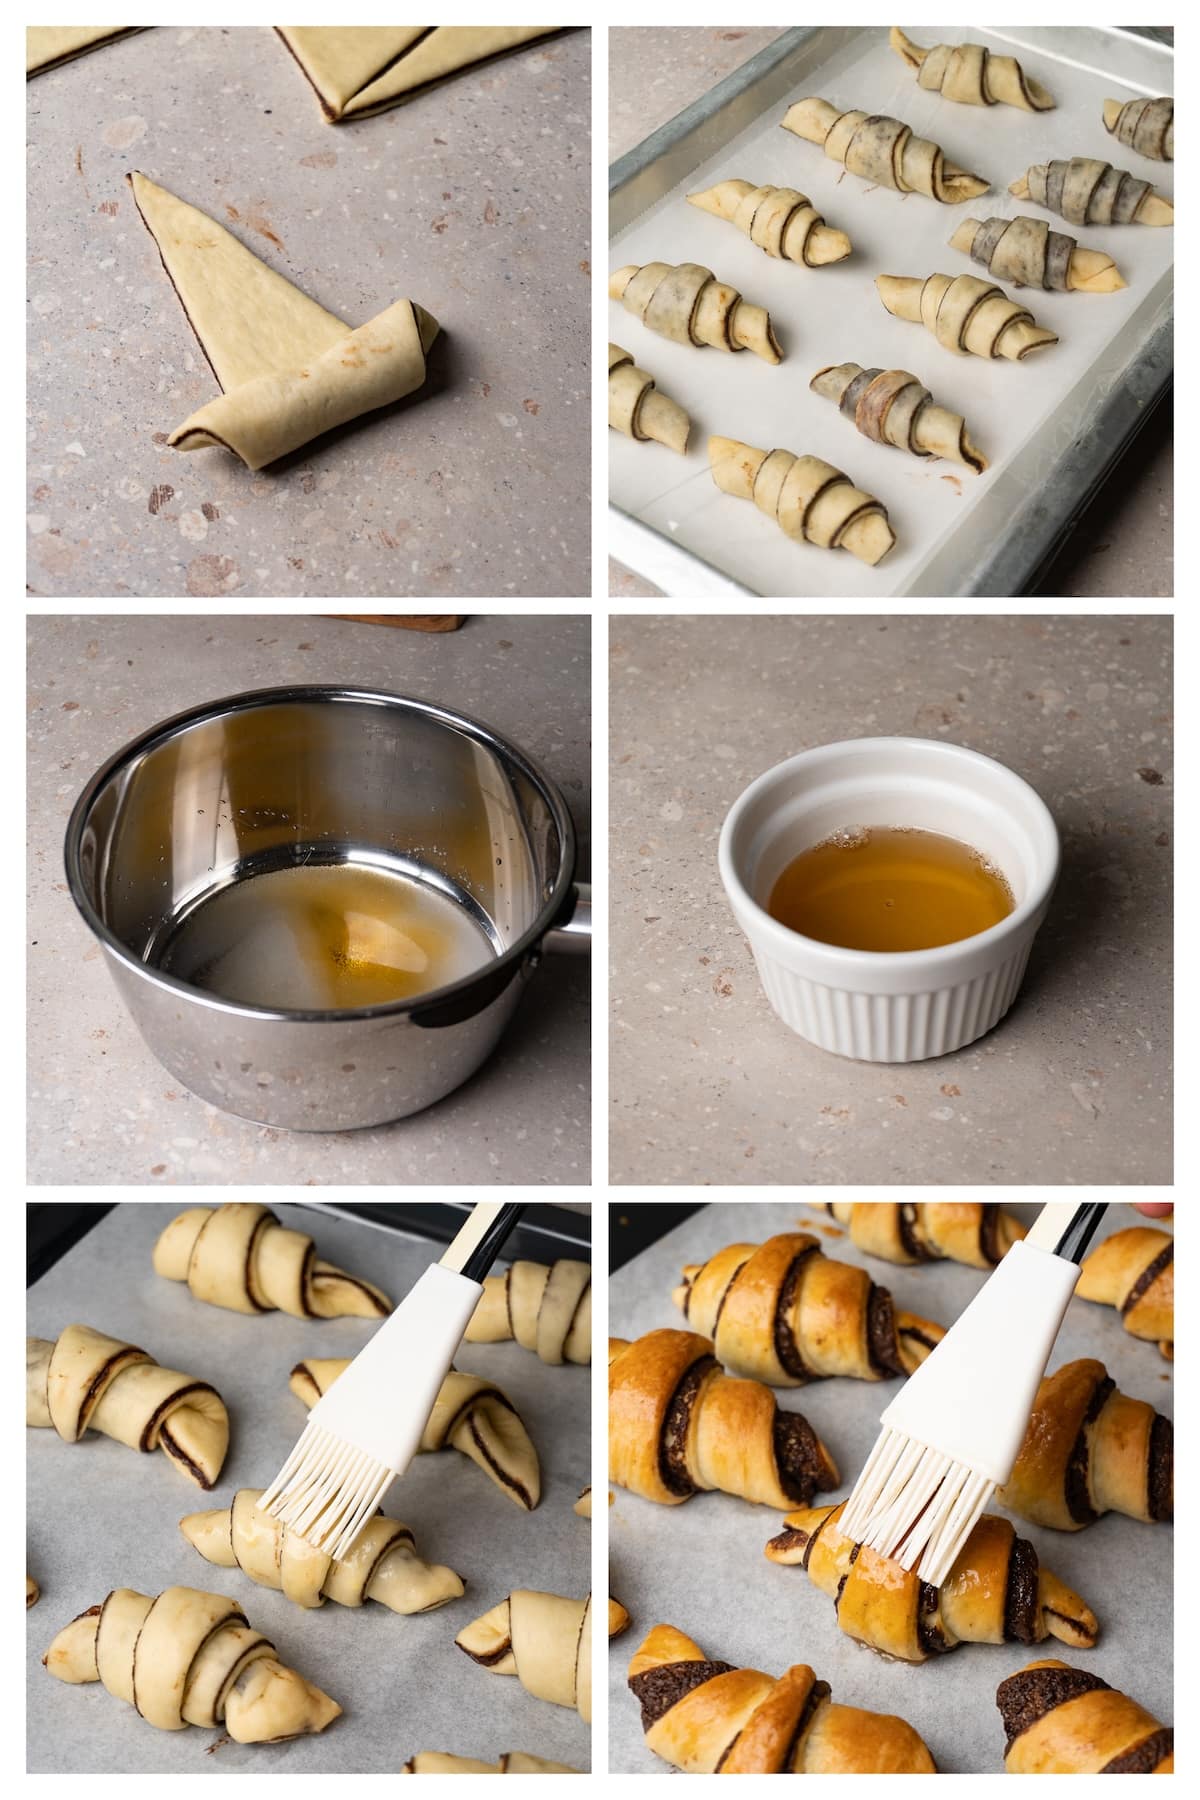 A collage image shows how to shape and bake chocolate rugelach in 6 steps.